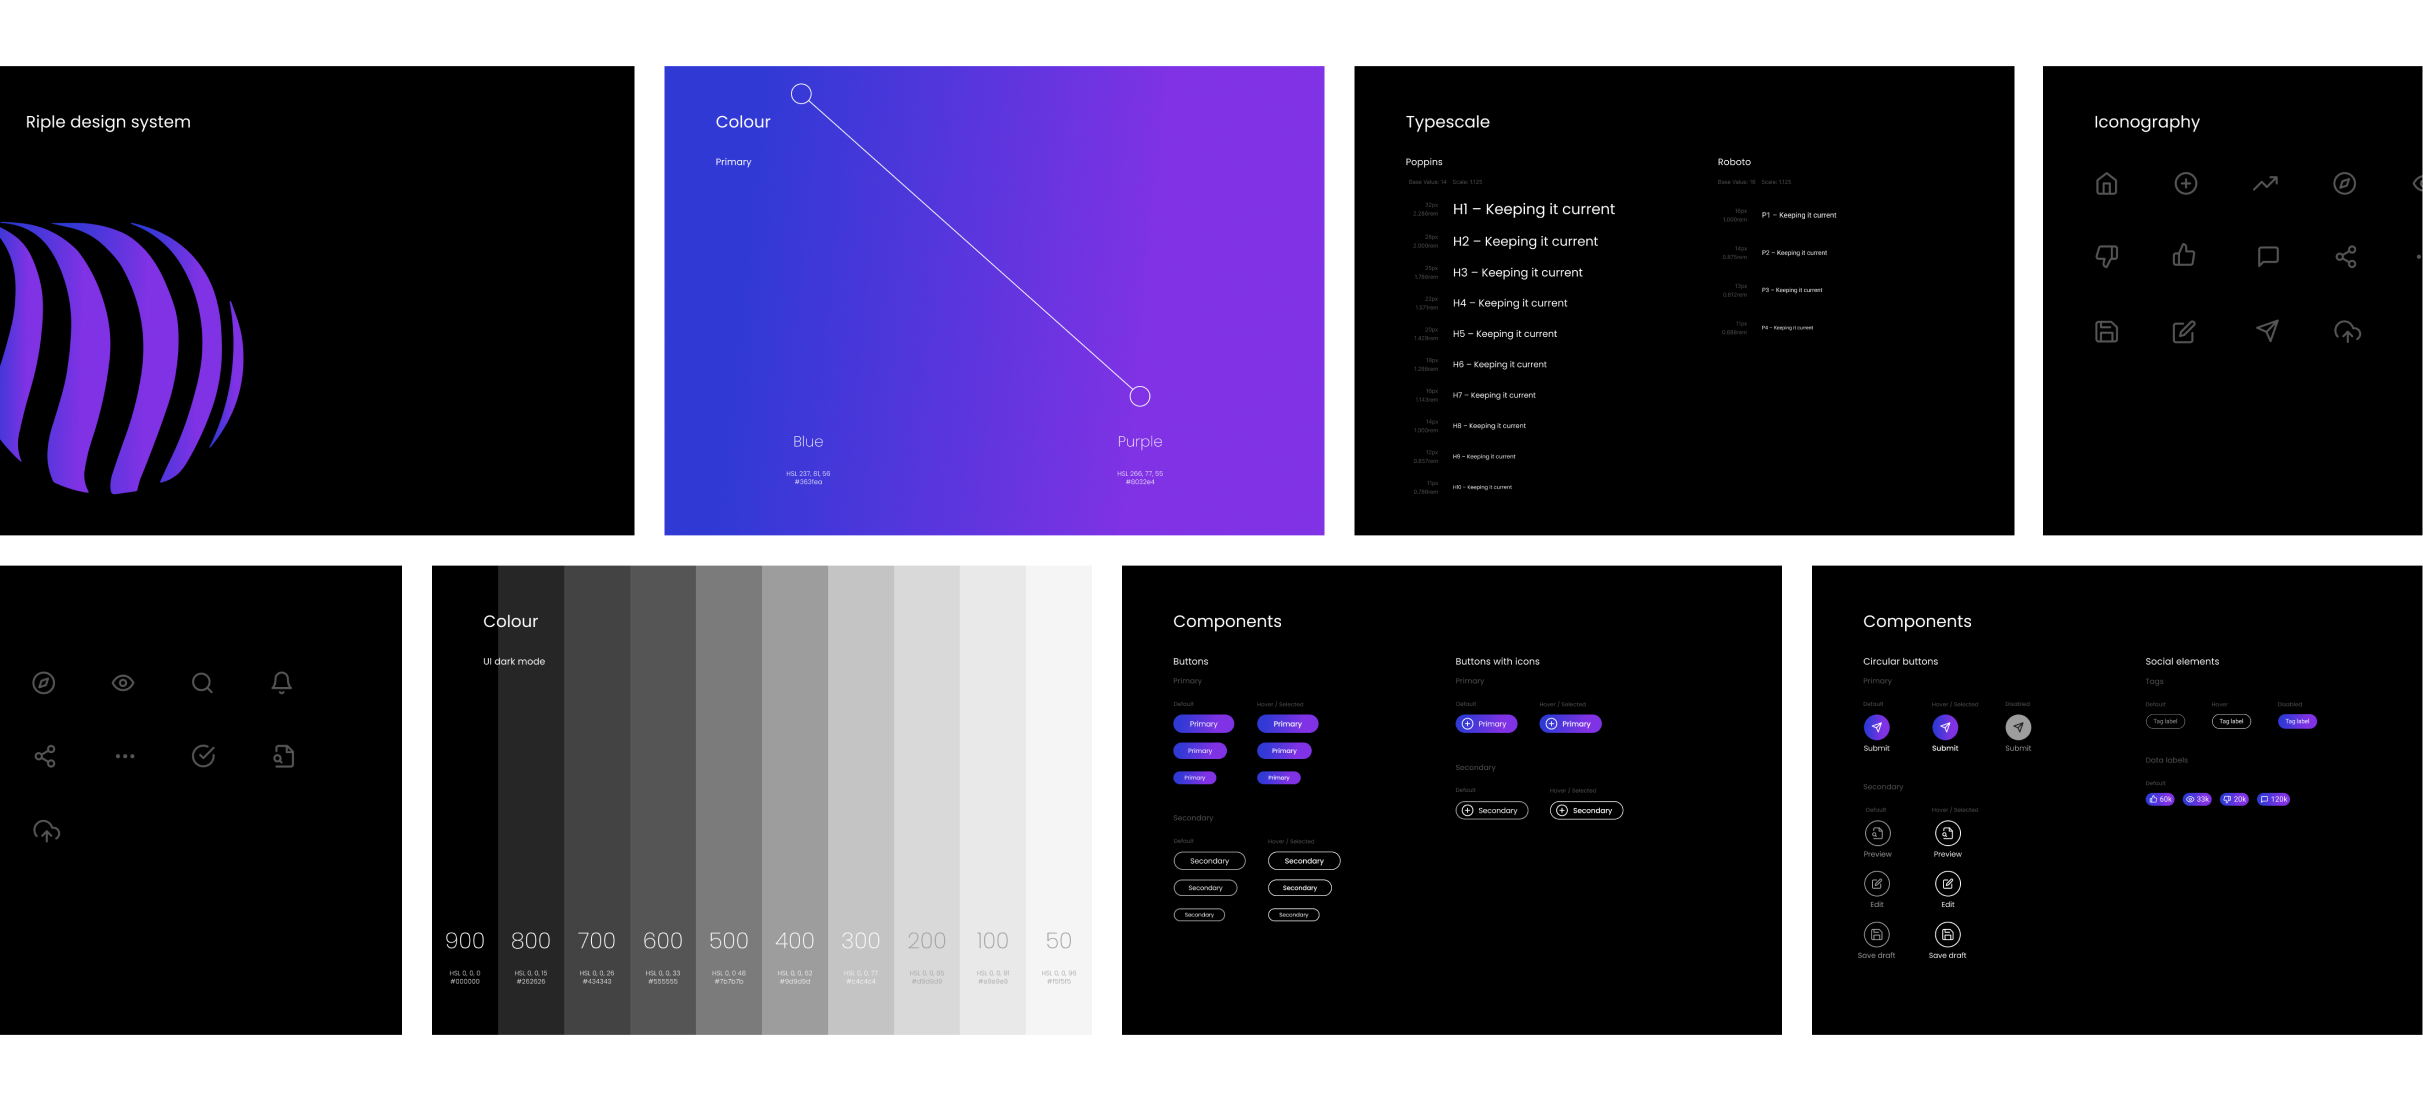 A selection of pages from Riple's new design system showing colour, typescale, iconography and their suite of components.